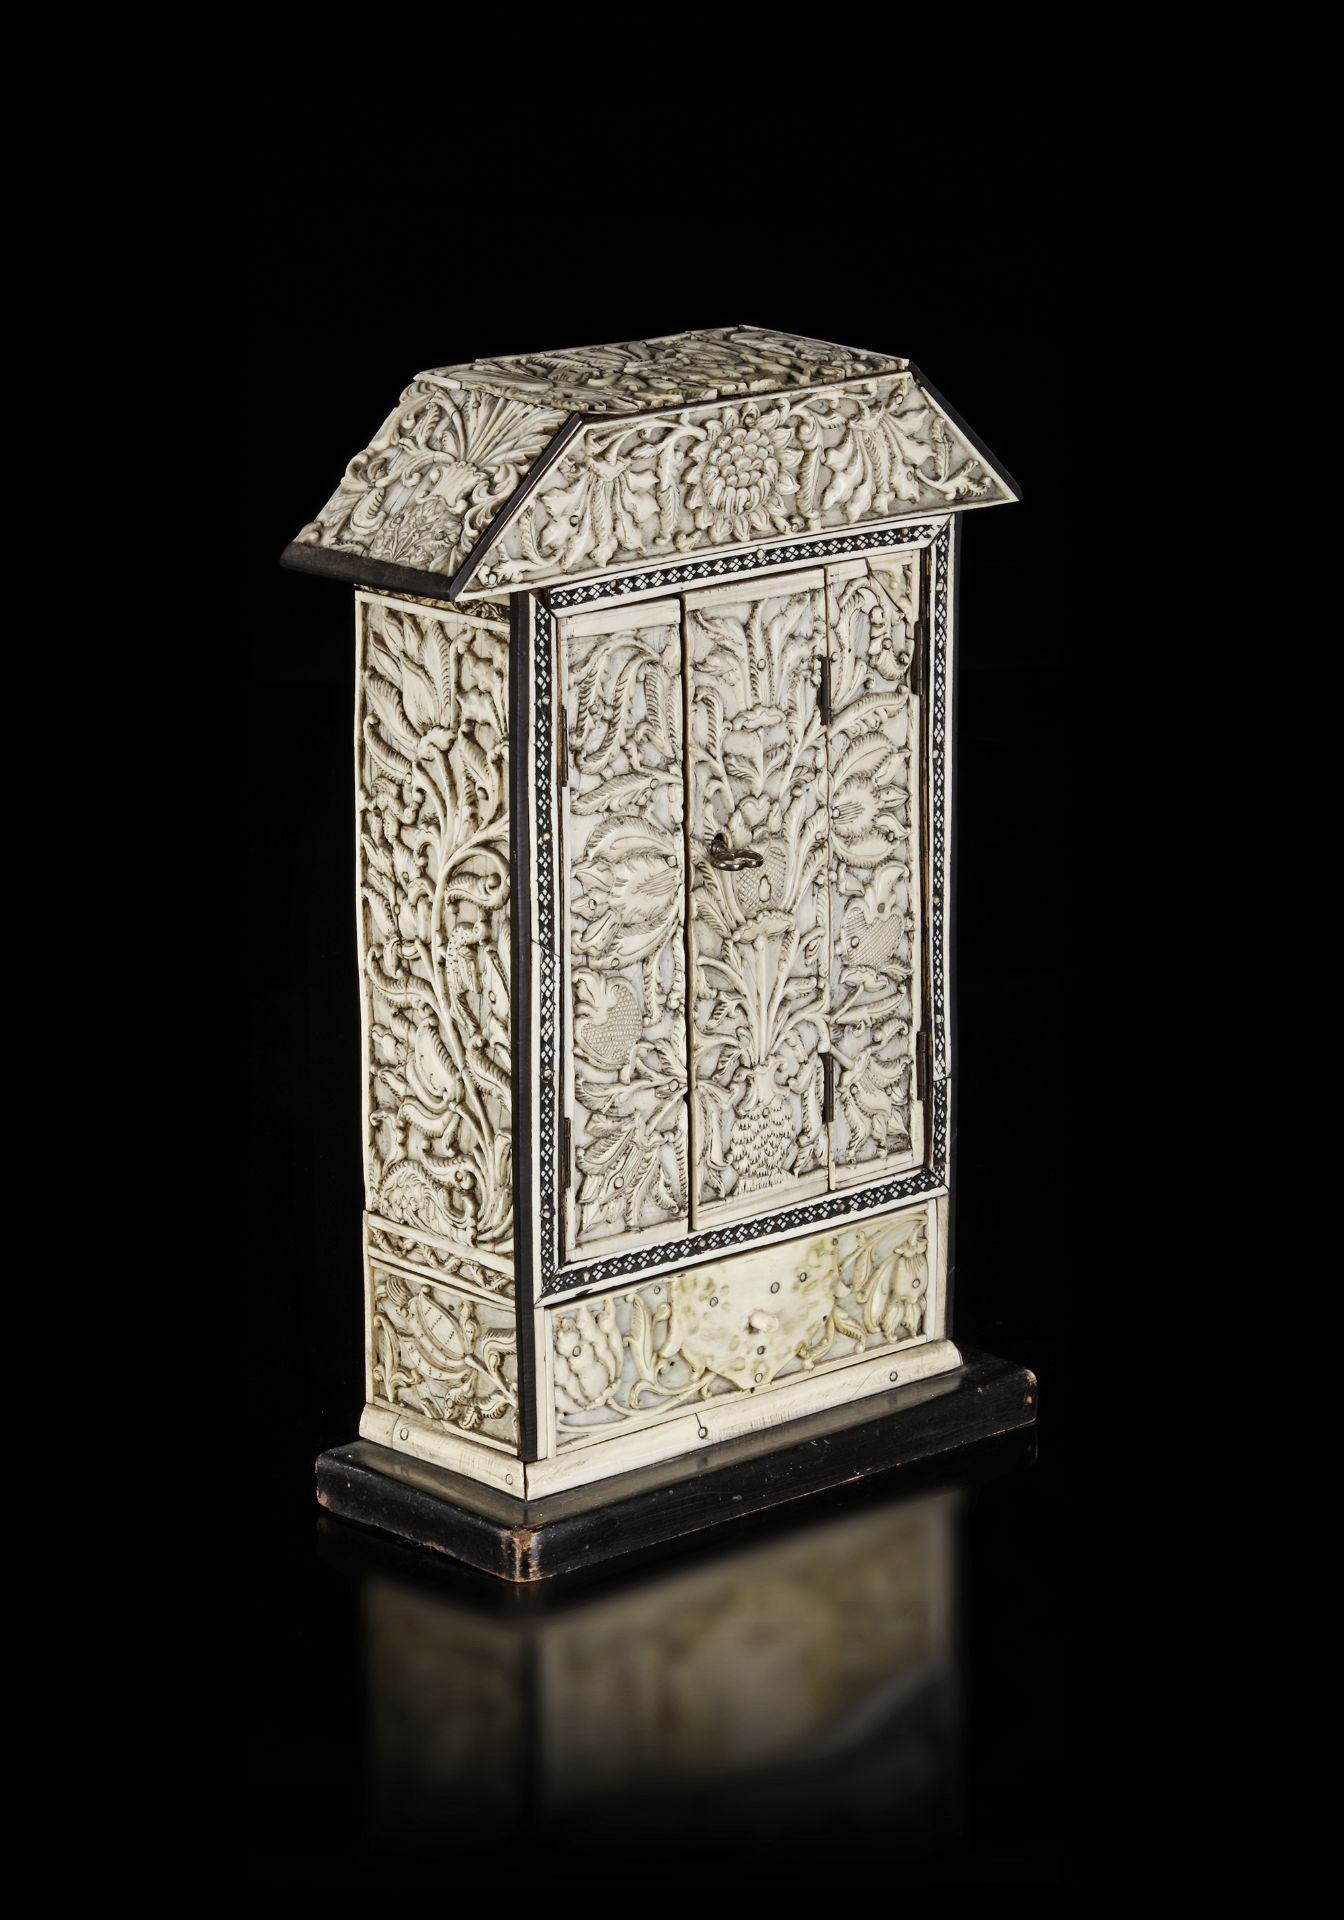 AN IVORY-VENEERED WOODED CABINET, SRI LANKA OR INDIA, LATE 17TH CENTURY - Image 3 of 6